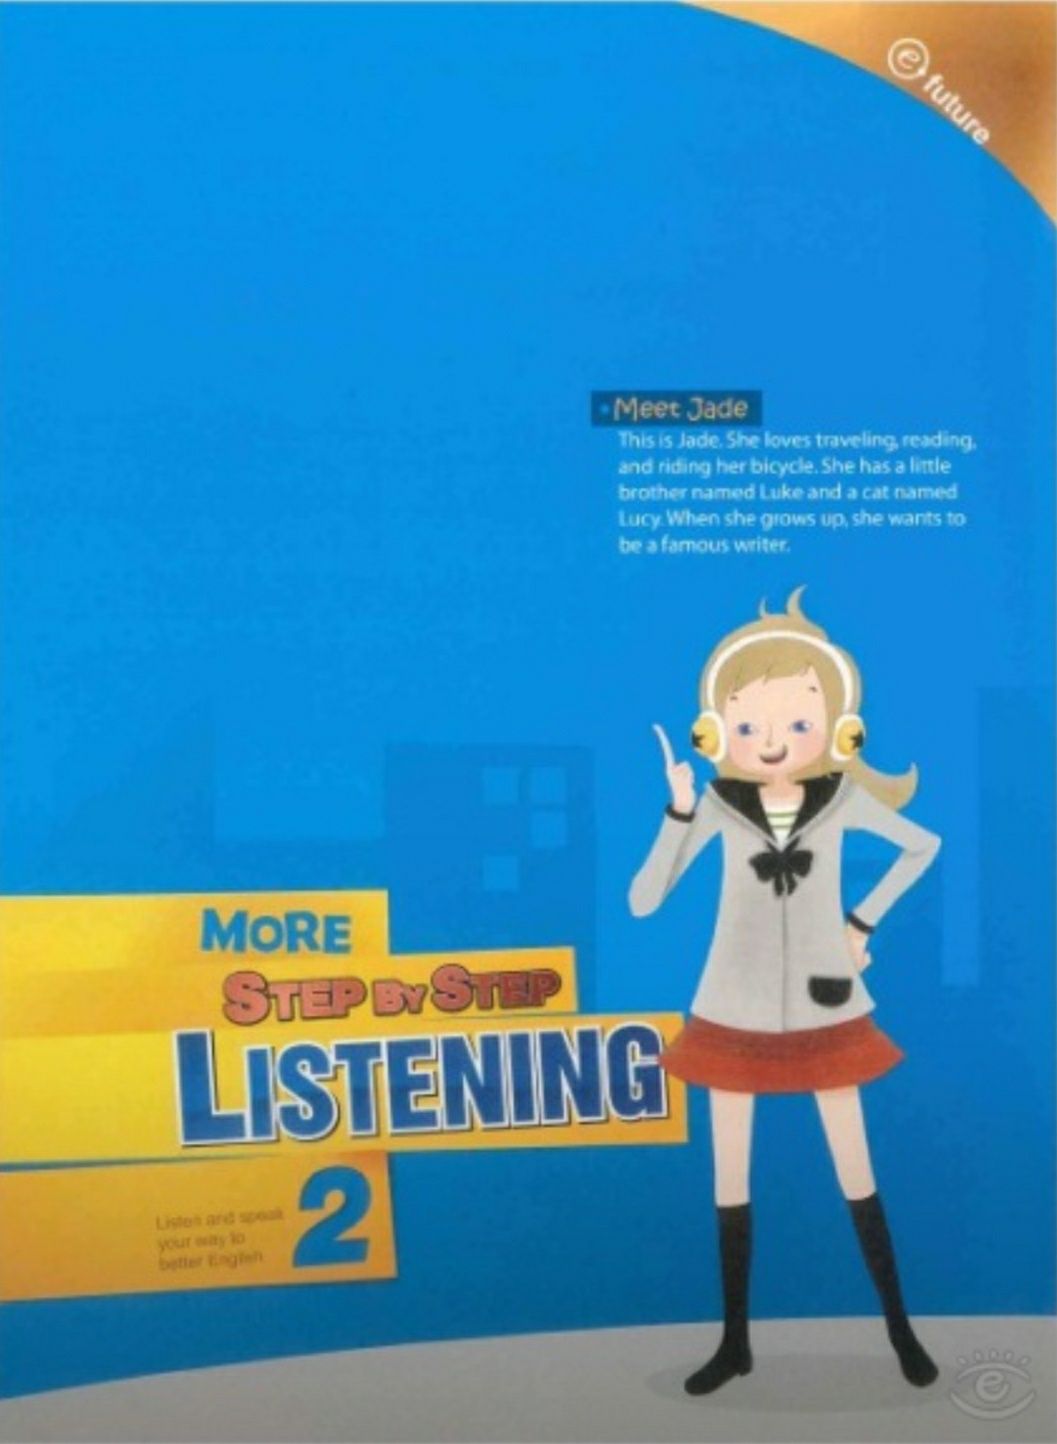 More Step by Step listening 1,2,3. The key to ielts writing task 1,2